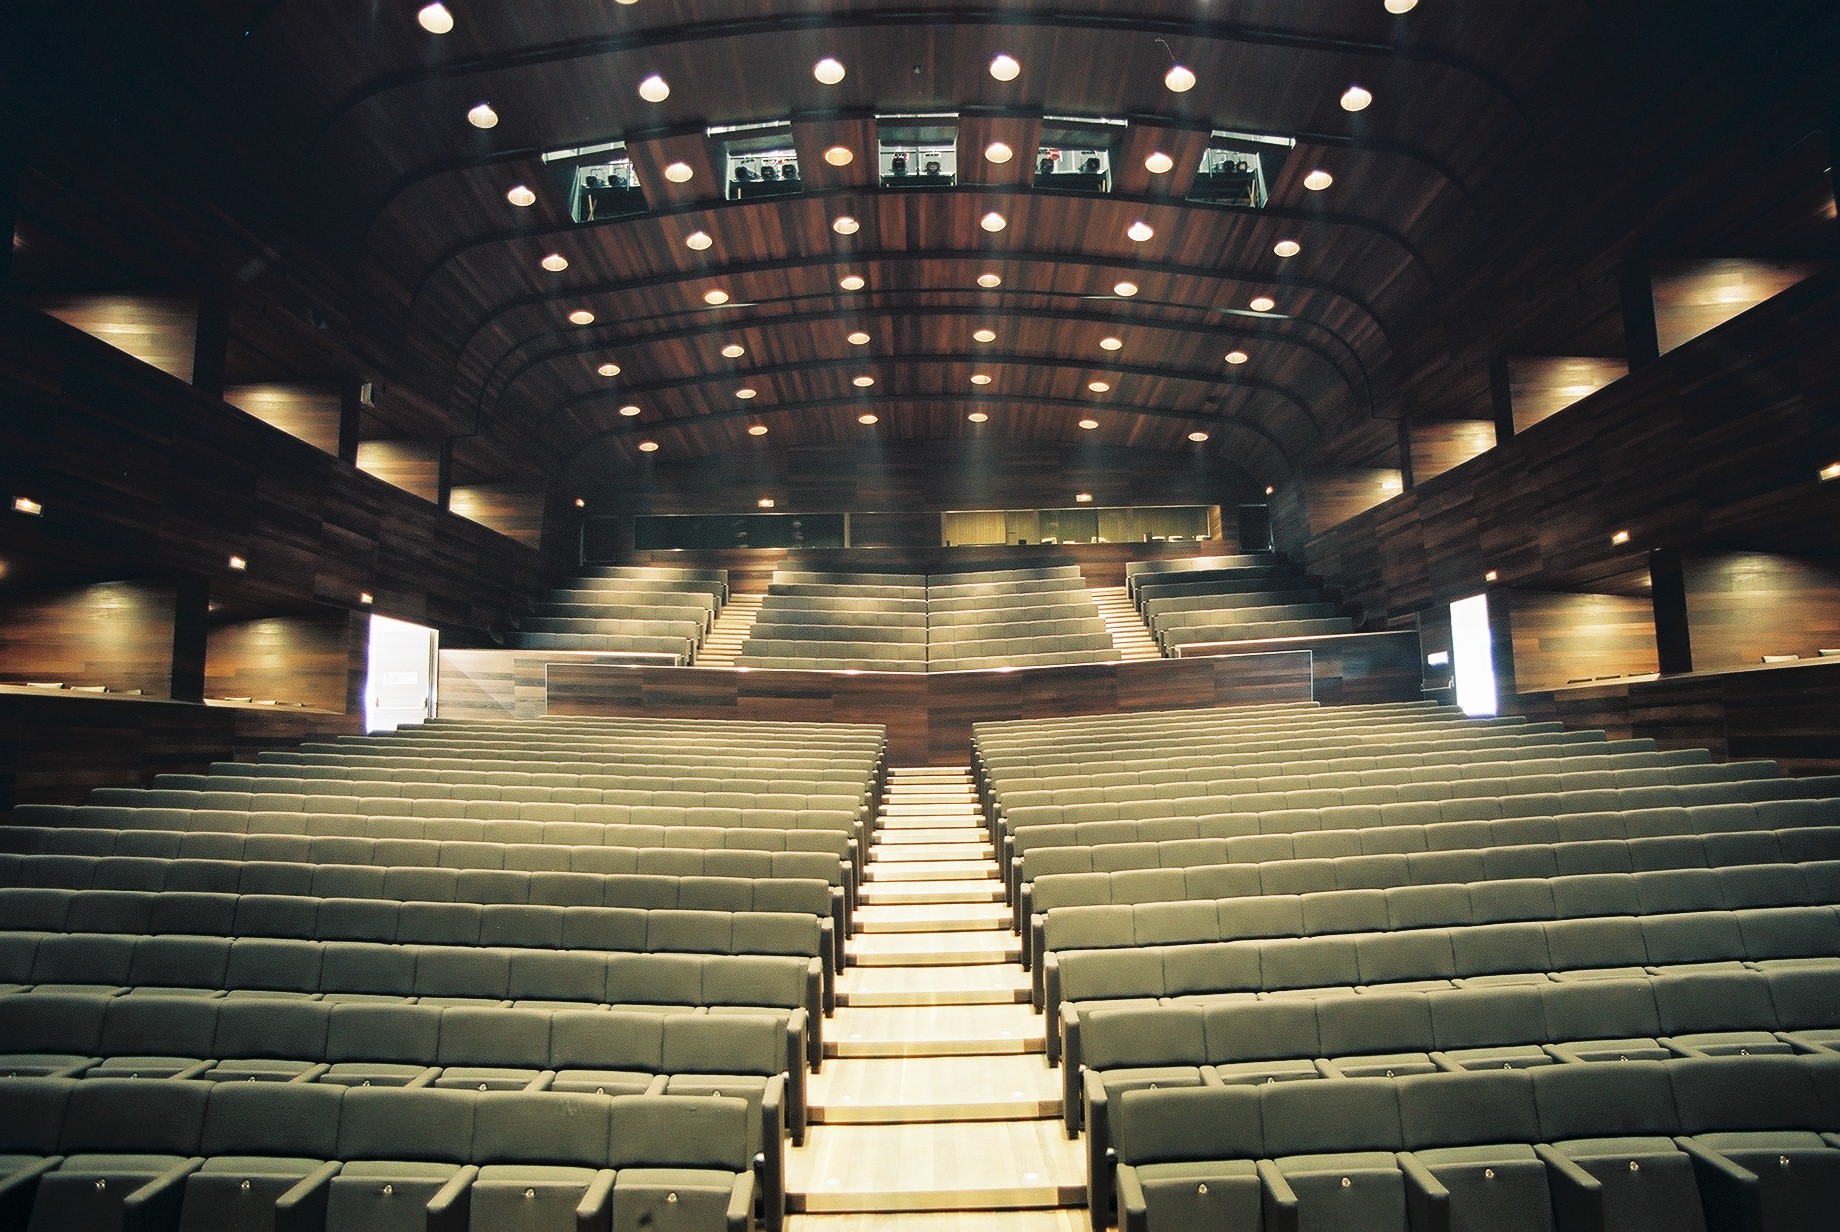 Concert Hall from the stage